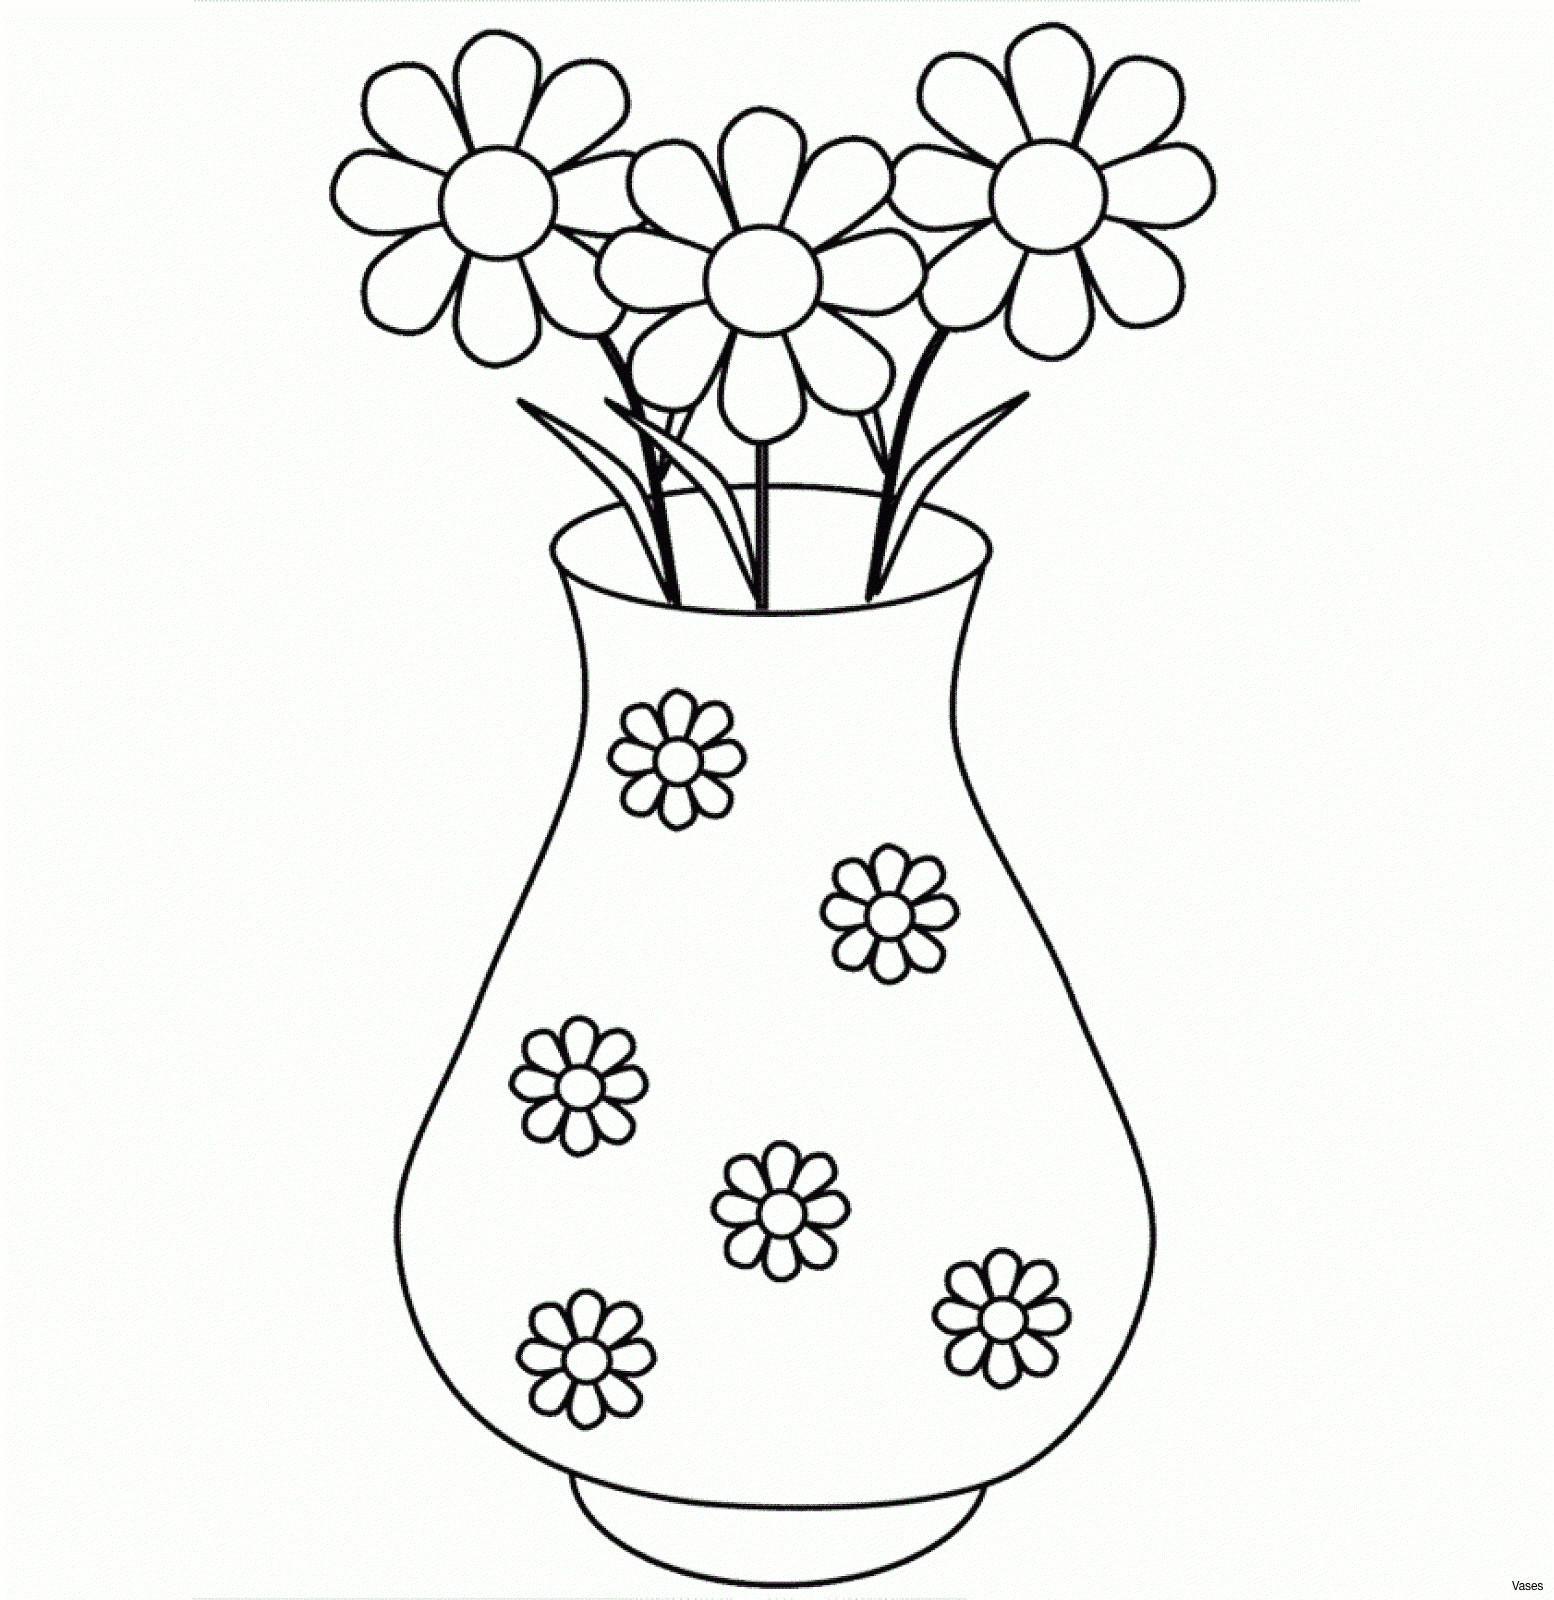 flowers to draw easy step by step 50 awesome collection sketch for kids of flowers to